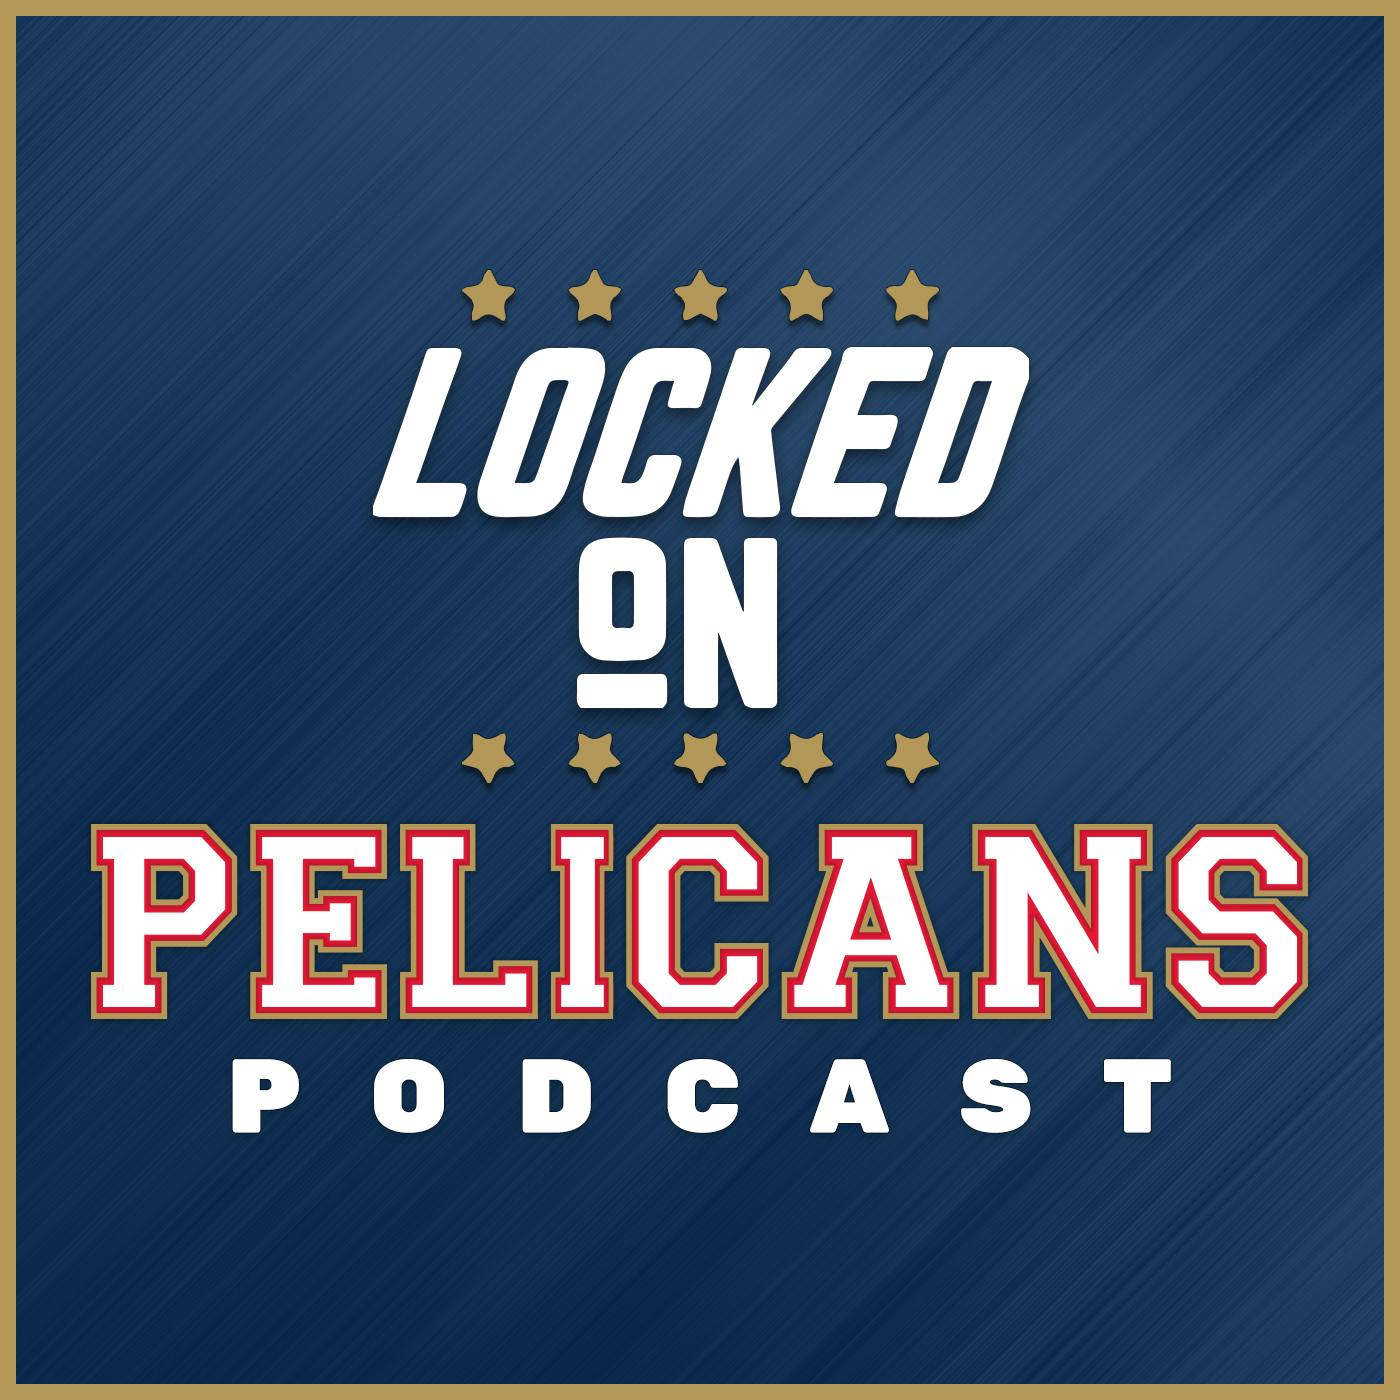 Swin Cash Shares Her Daily Inspiration - Sports Illustrated New Orleans  Pelicans News, Analysis, and More